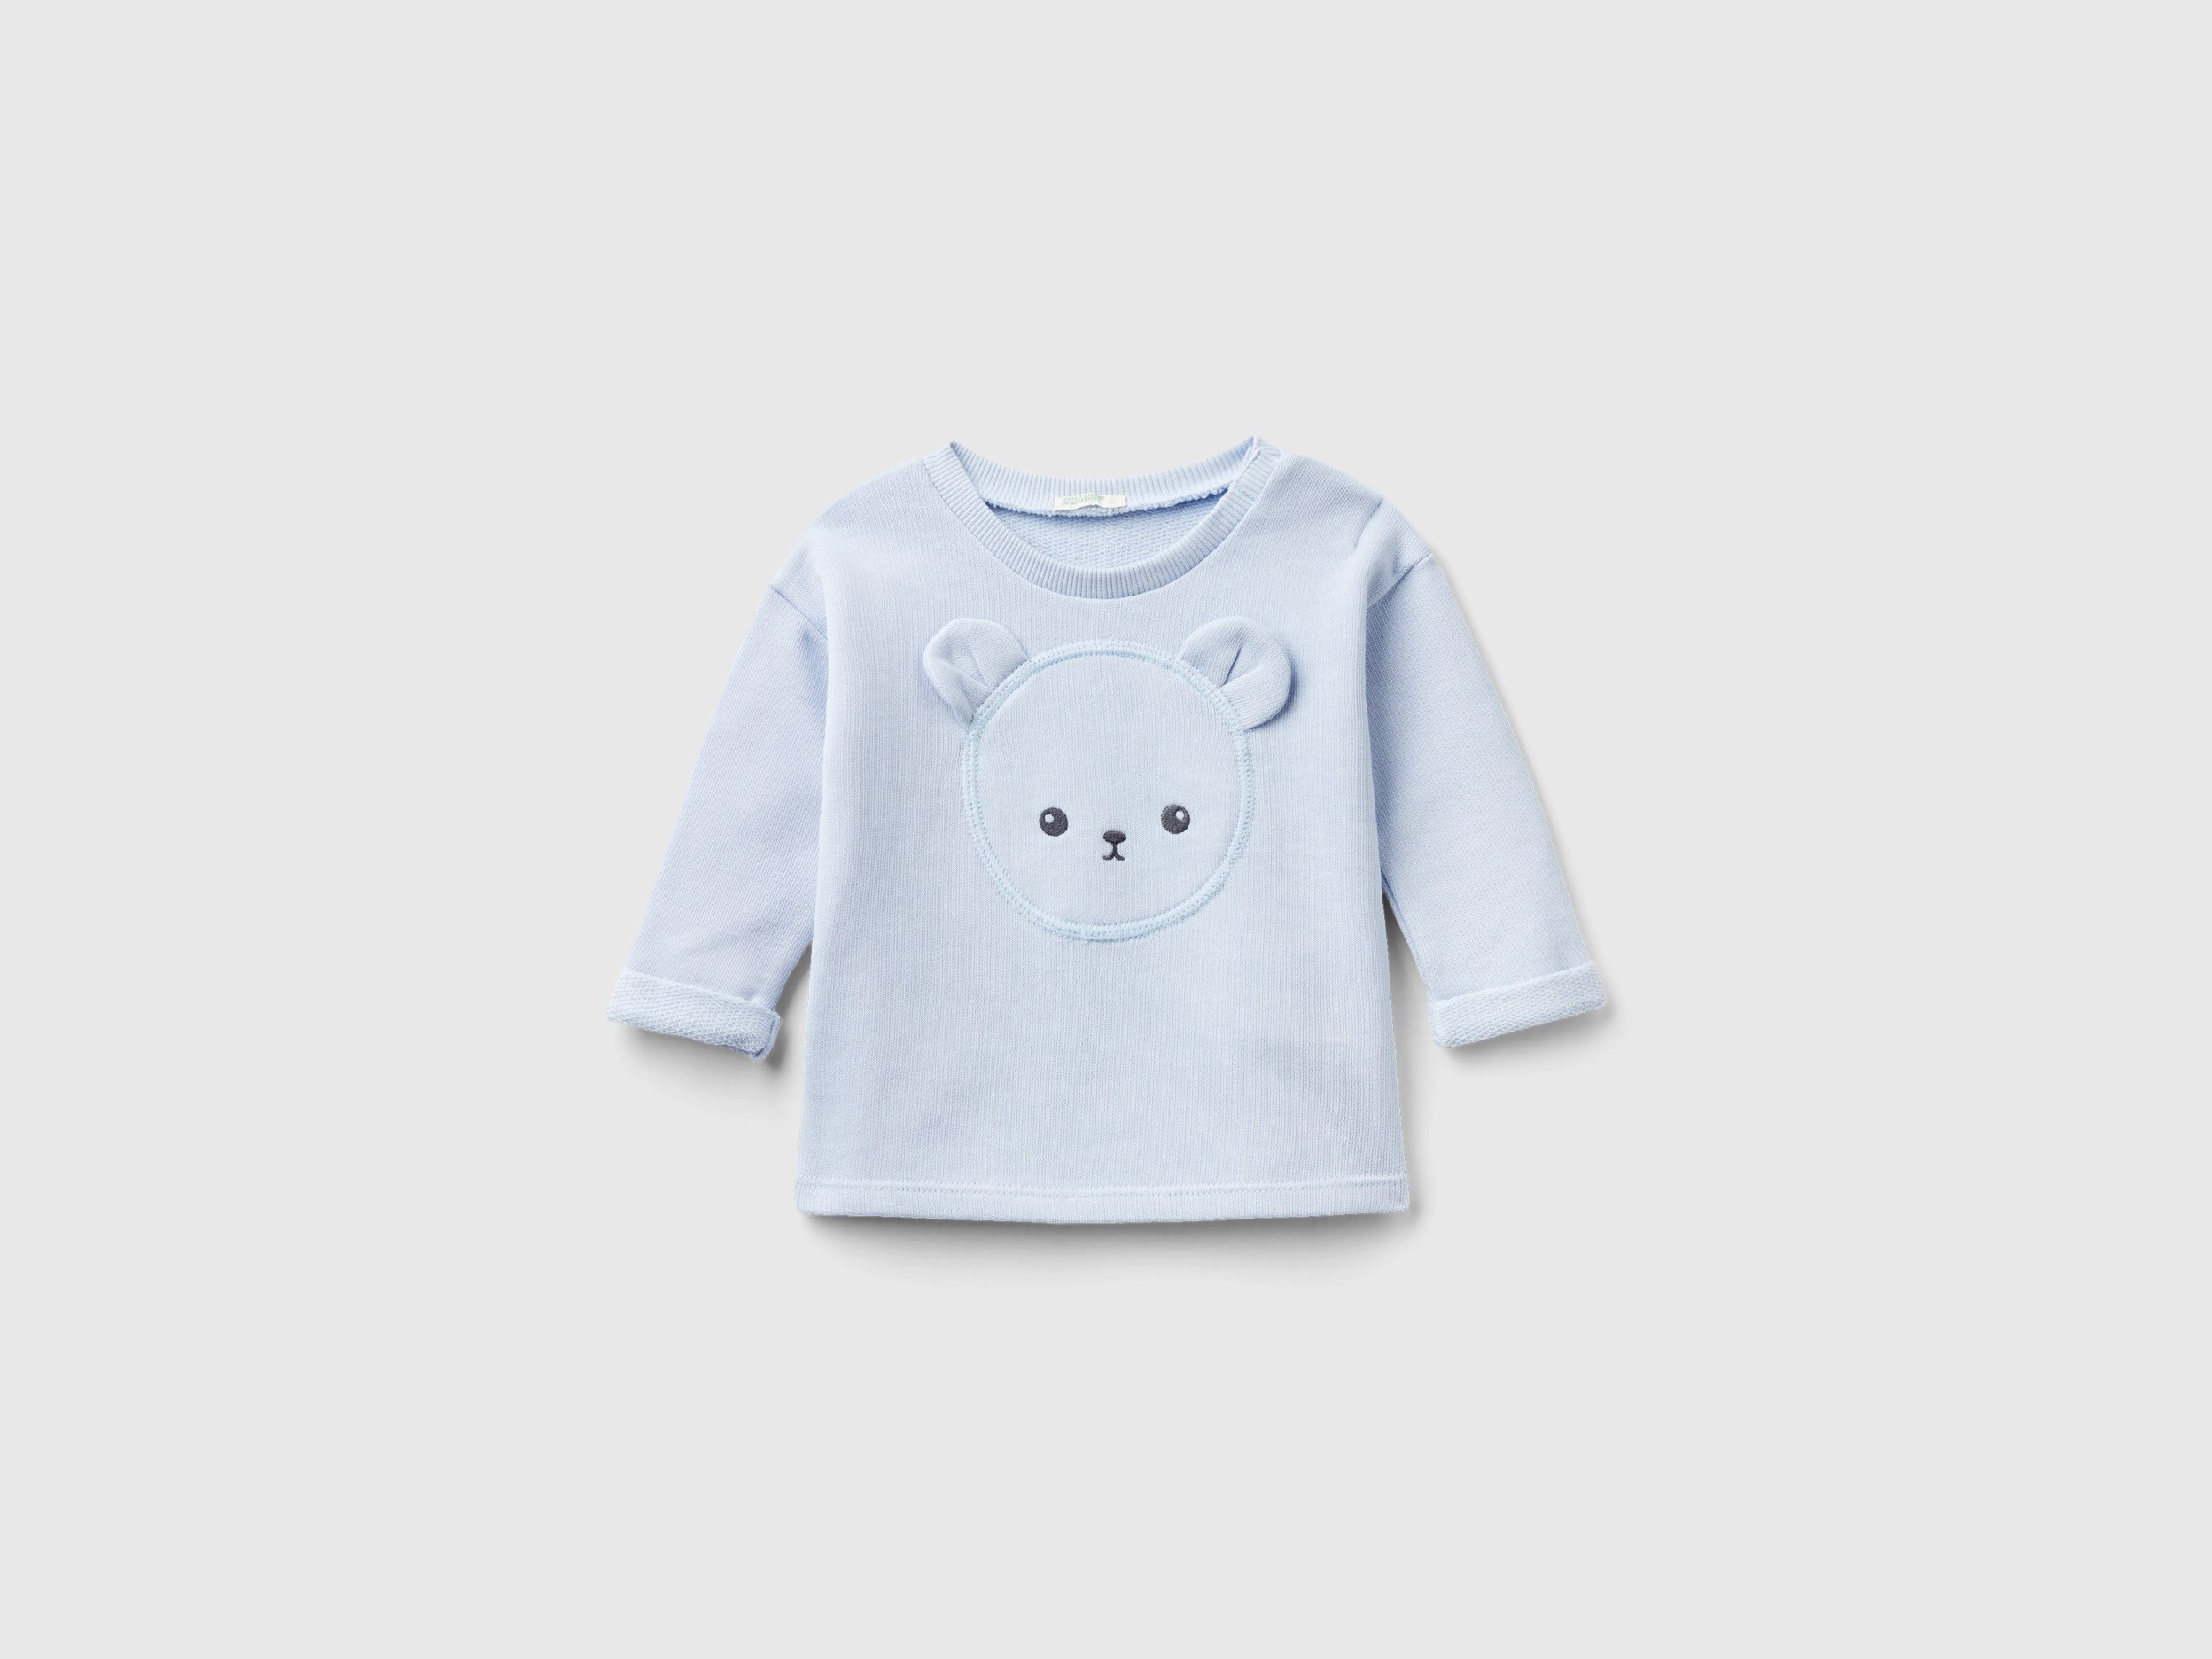 Image of Benetton, Organic Cotton Sweatshirt With Embroidery, size 50, Sky Blue, Kids